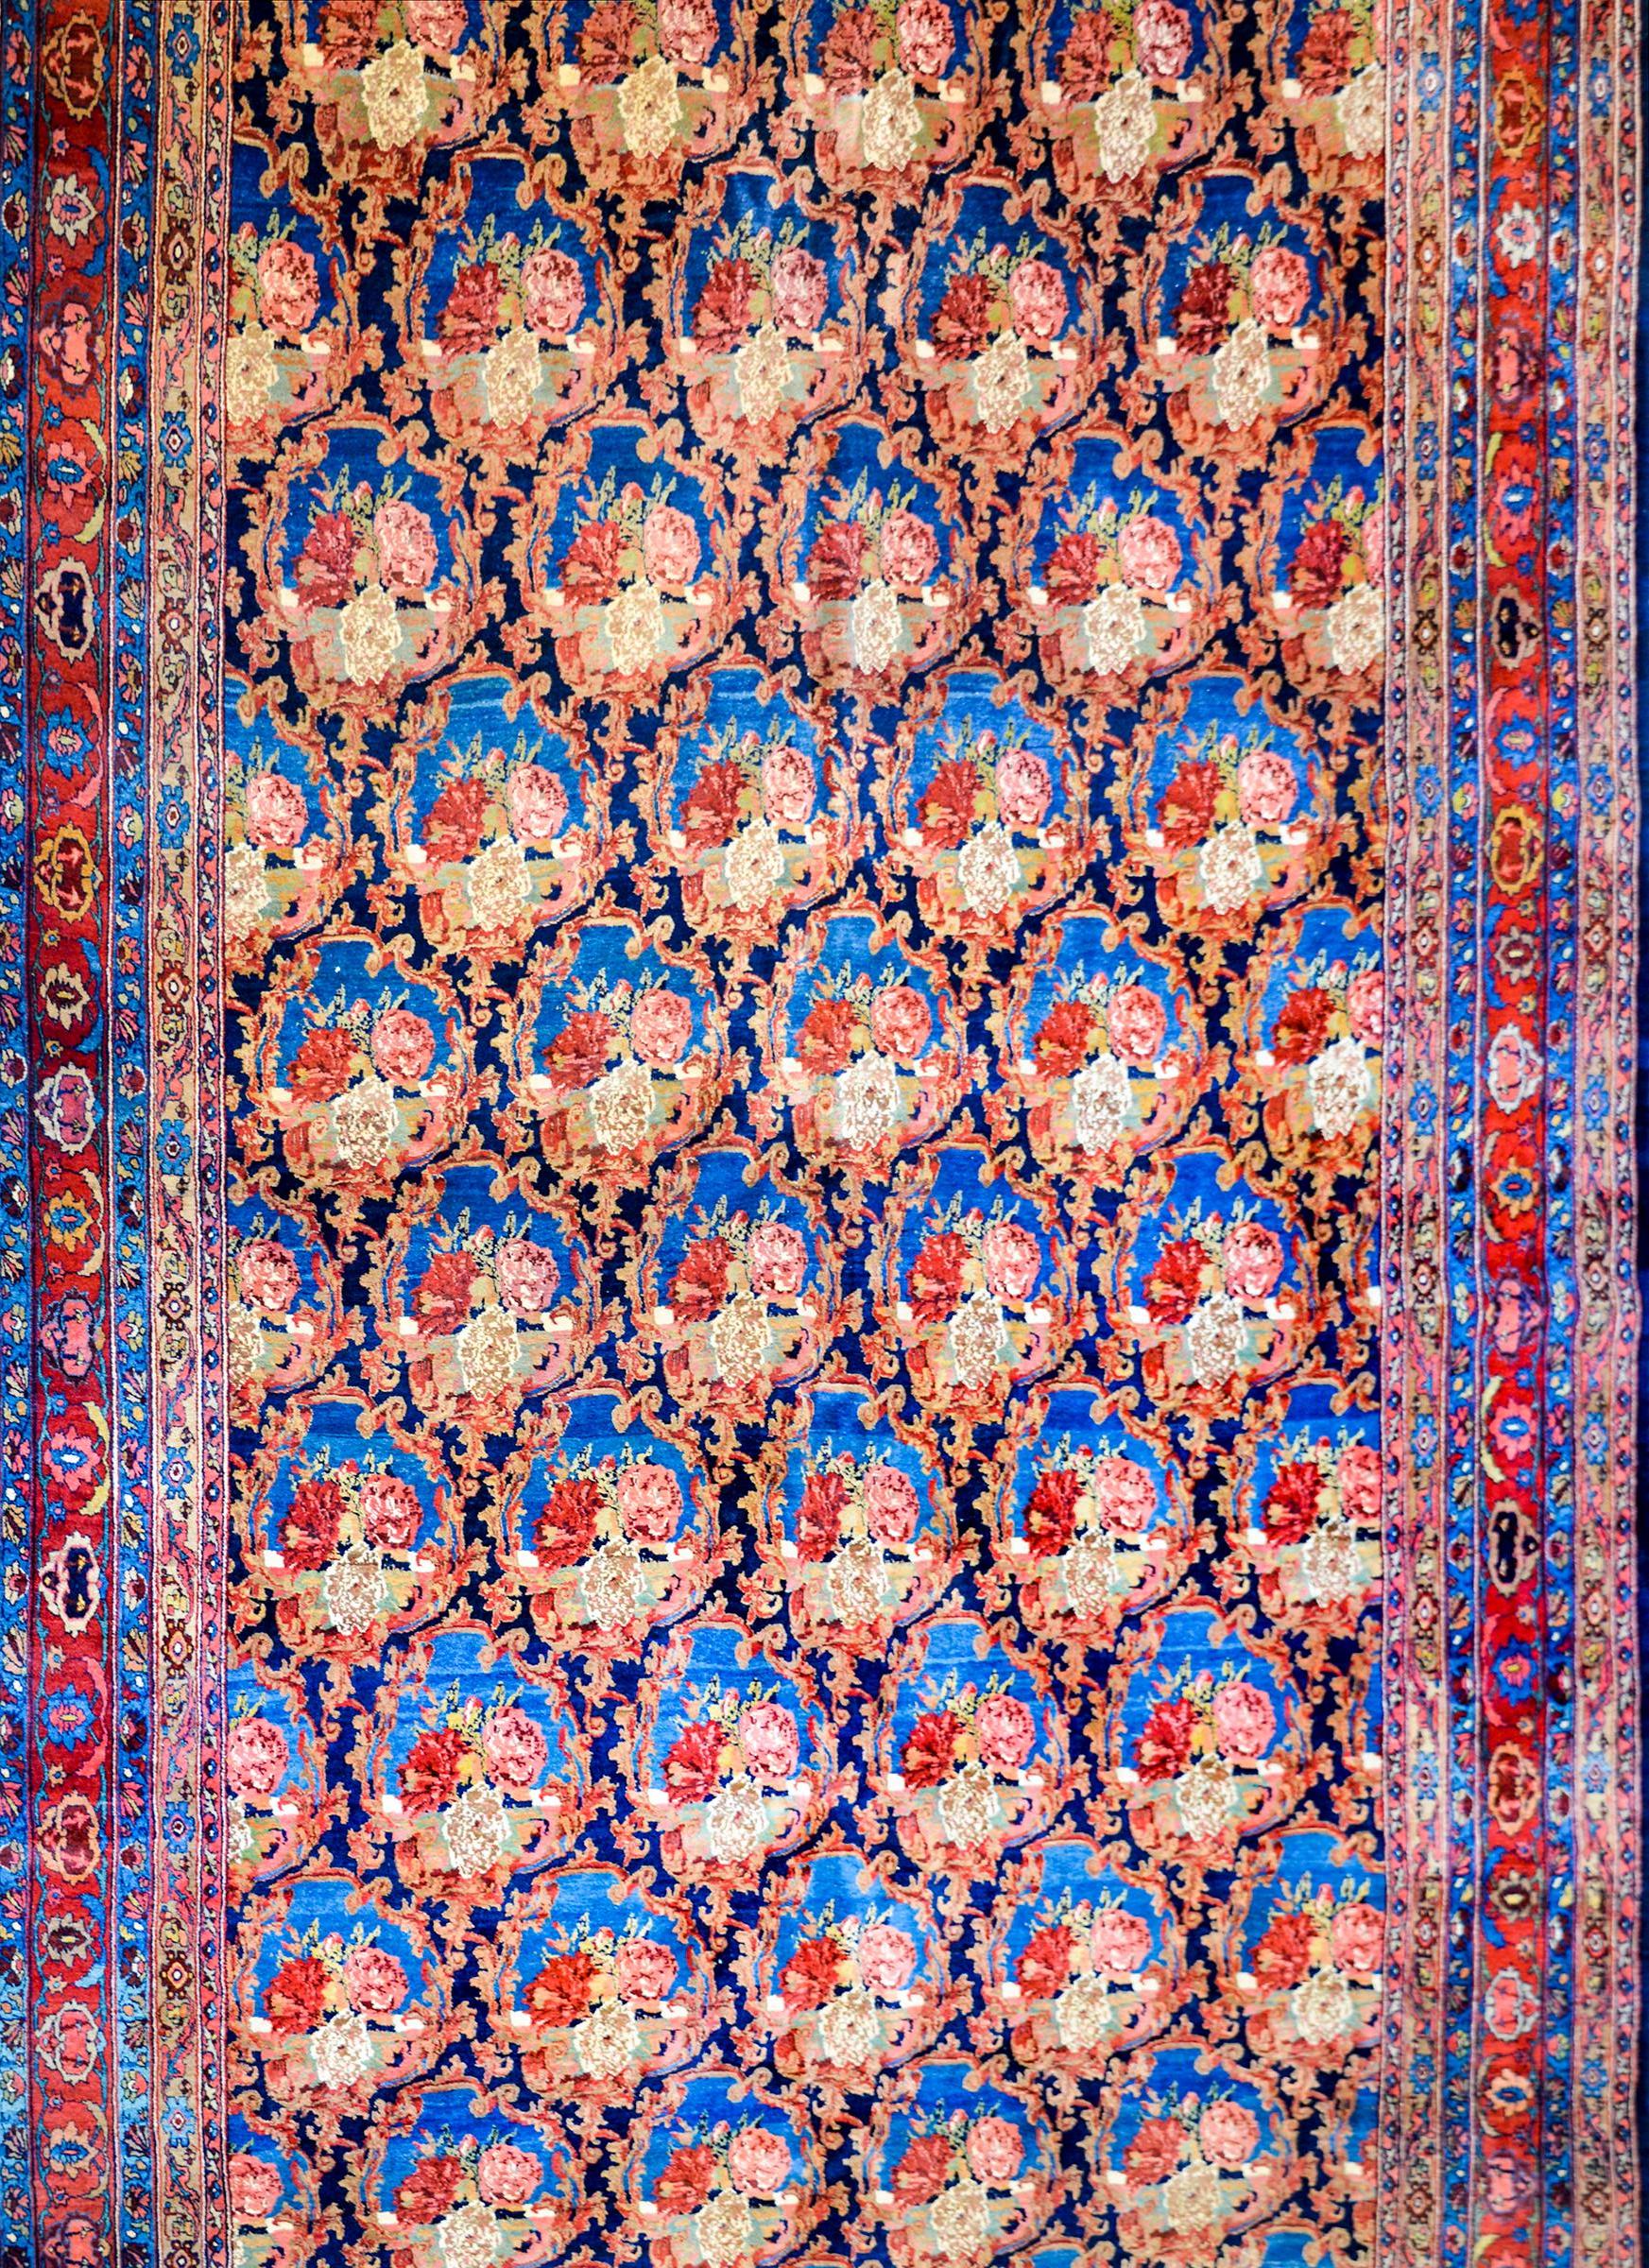 An early 20th century Persian Bidjar rug with a beautiful all-over lattice pattern with large-scale roses on a light indigo background. The border is complex, composed of multiple matching pairs of petite floral patterned stripes and a central